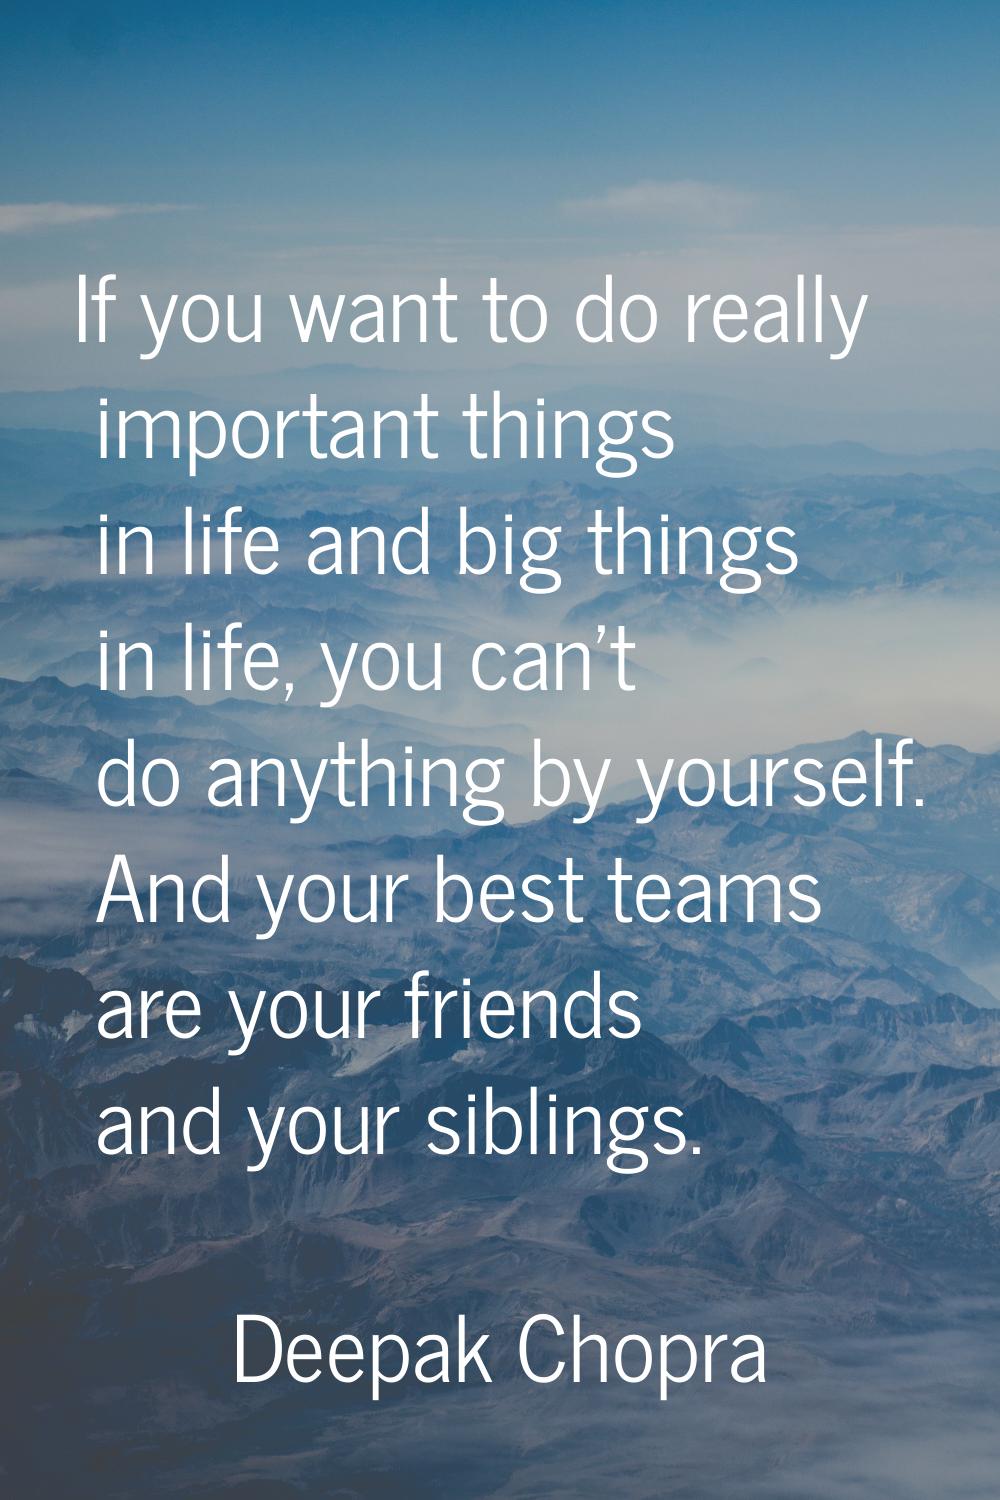 If you want to do really important things in life and big things in life, you can't do anything by 